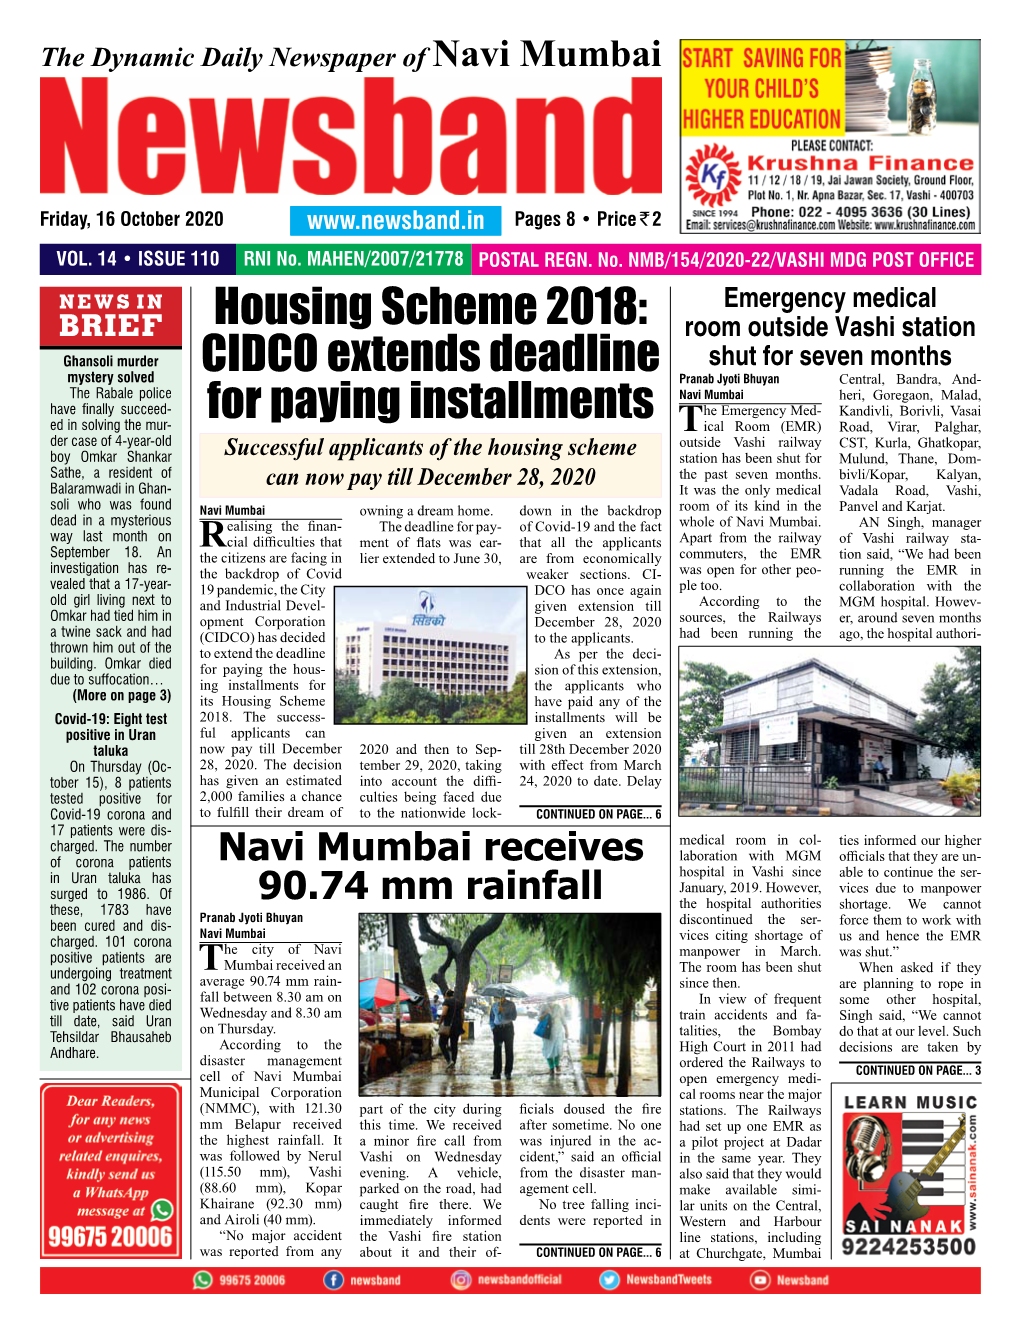 CIDCO Extends Deadline for Paying Installments